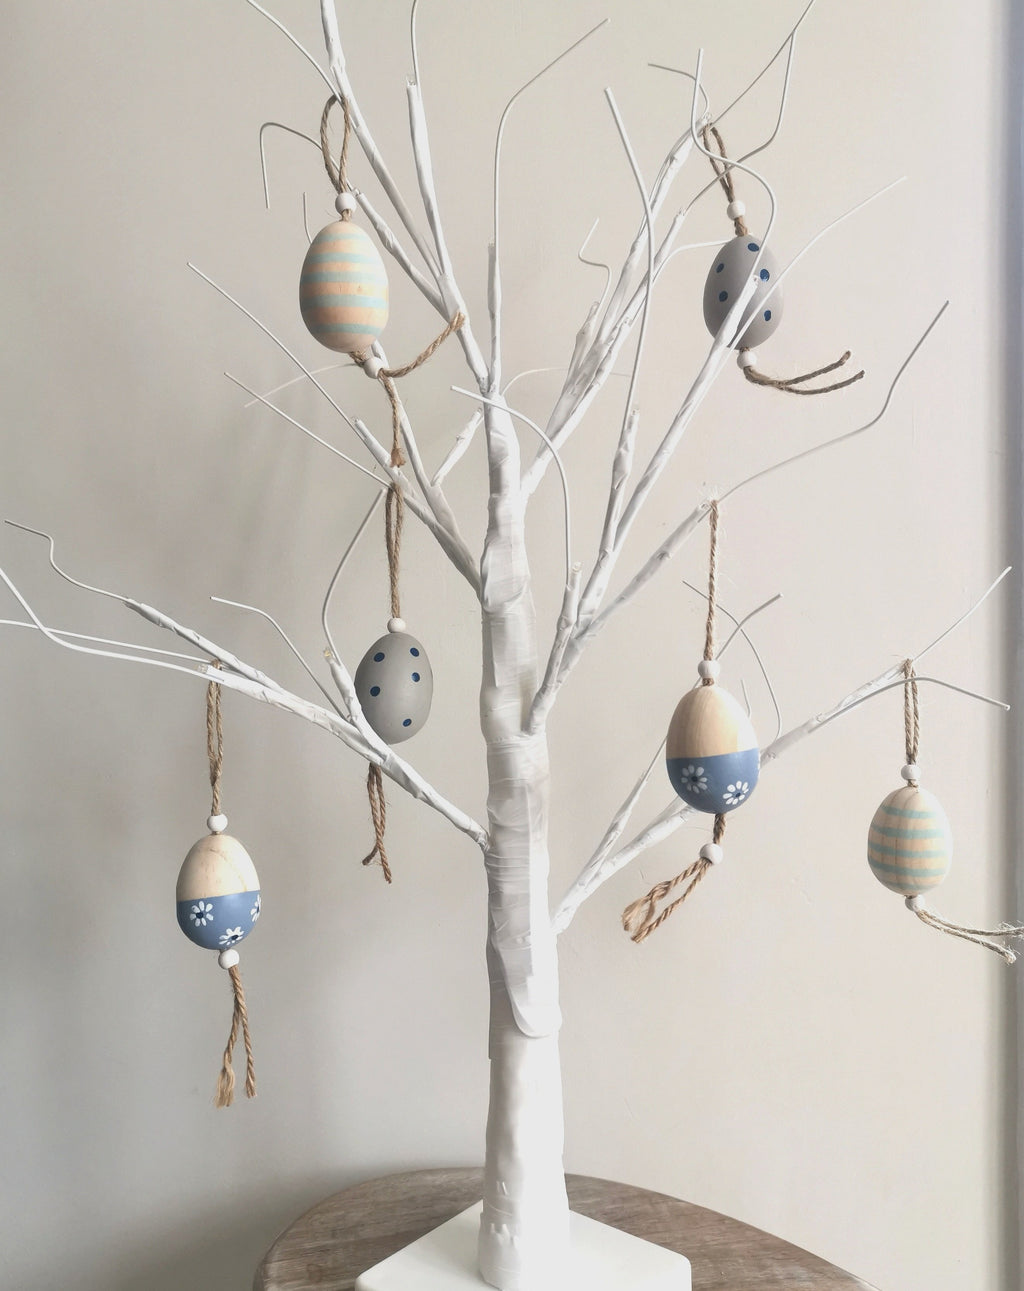 Decorative Hanging Easter Eggs - The Burrow Interiors